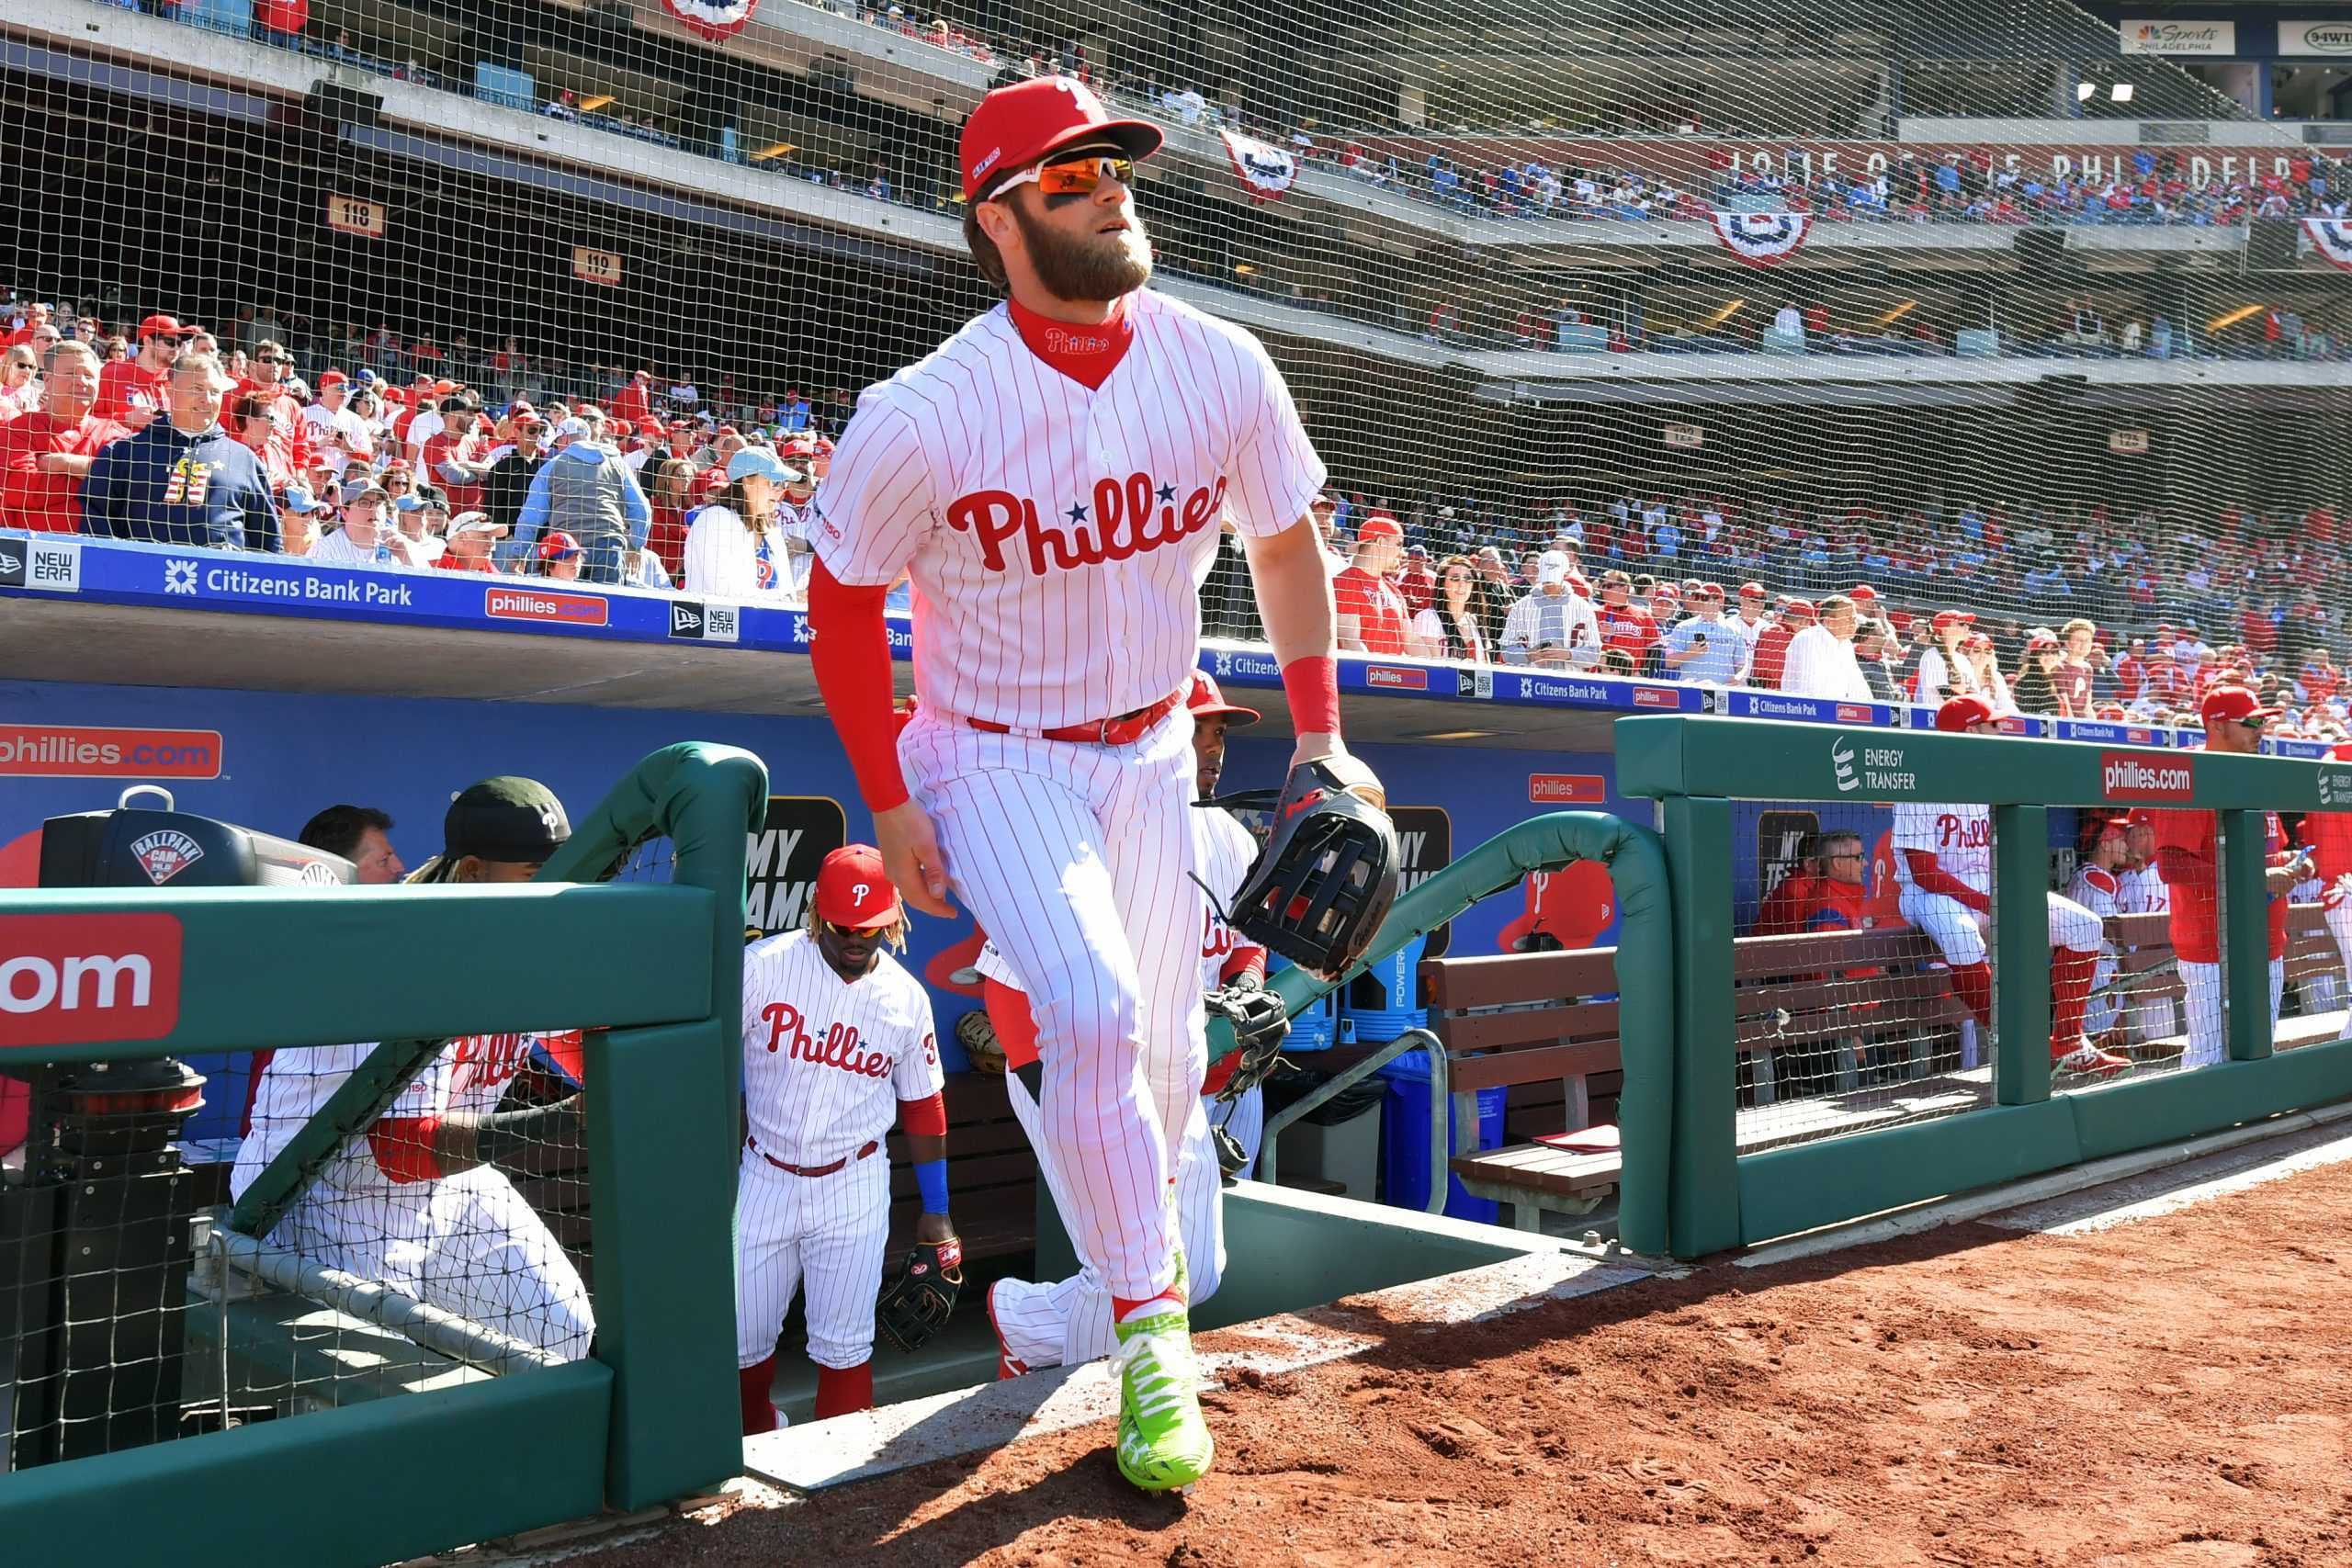 Bryce Harper #3 of the Philadelphia Phillies runs onto the field before the game against the Atlanta Braves on Opening Day at Citizens Bank Park on March 28, 2019 in Philadelphia, Pennsylvania. (Drew Hallowell/Getty Images/TNS)